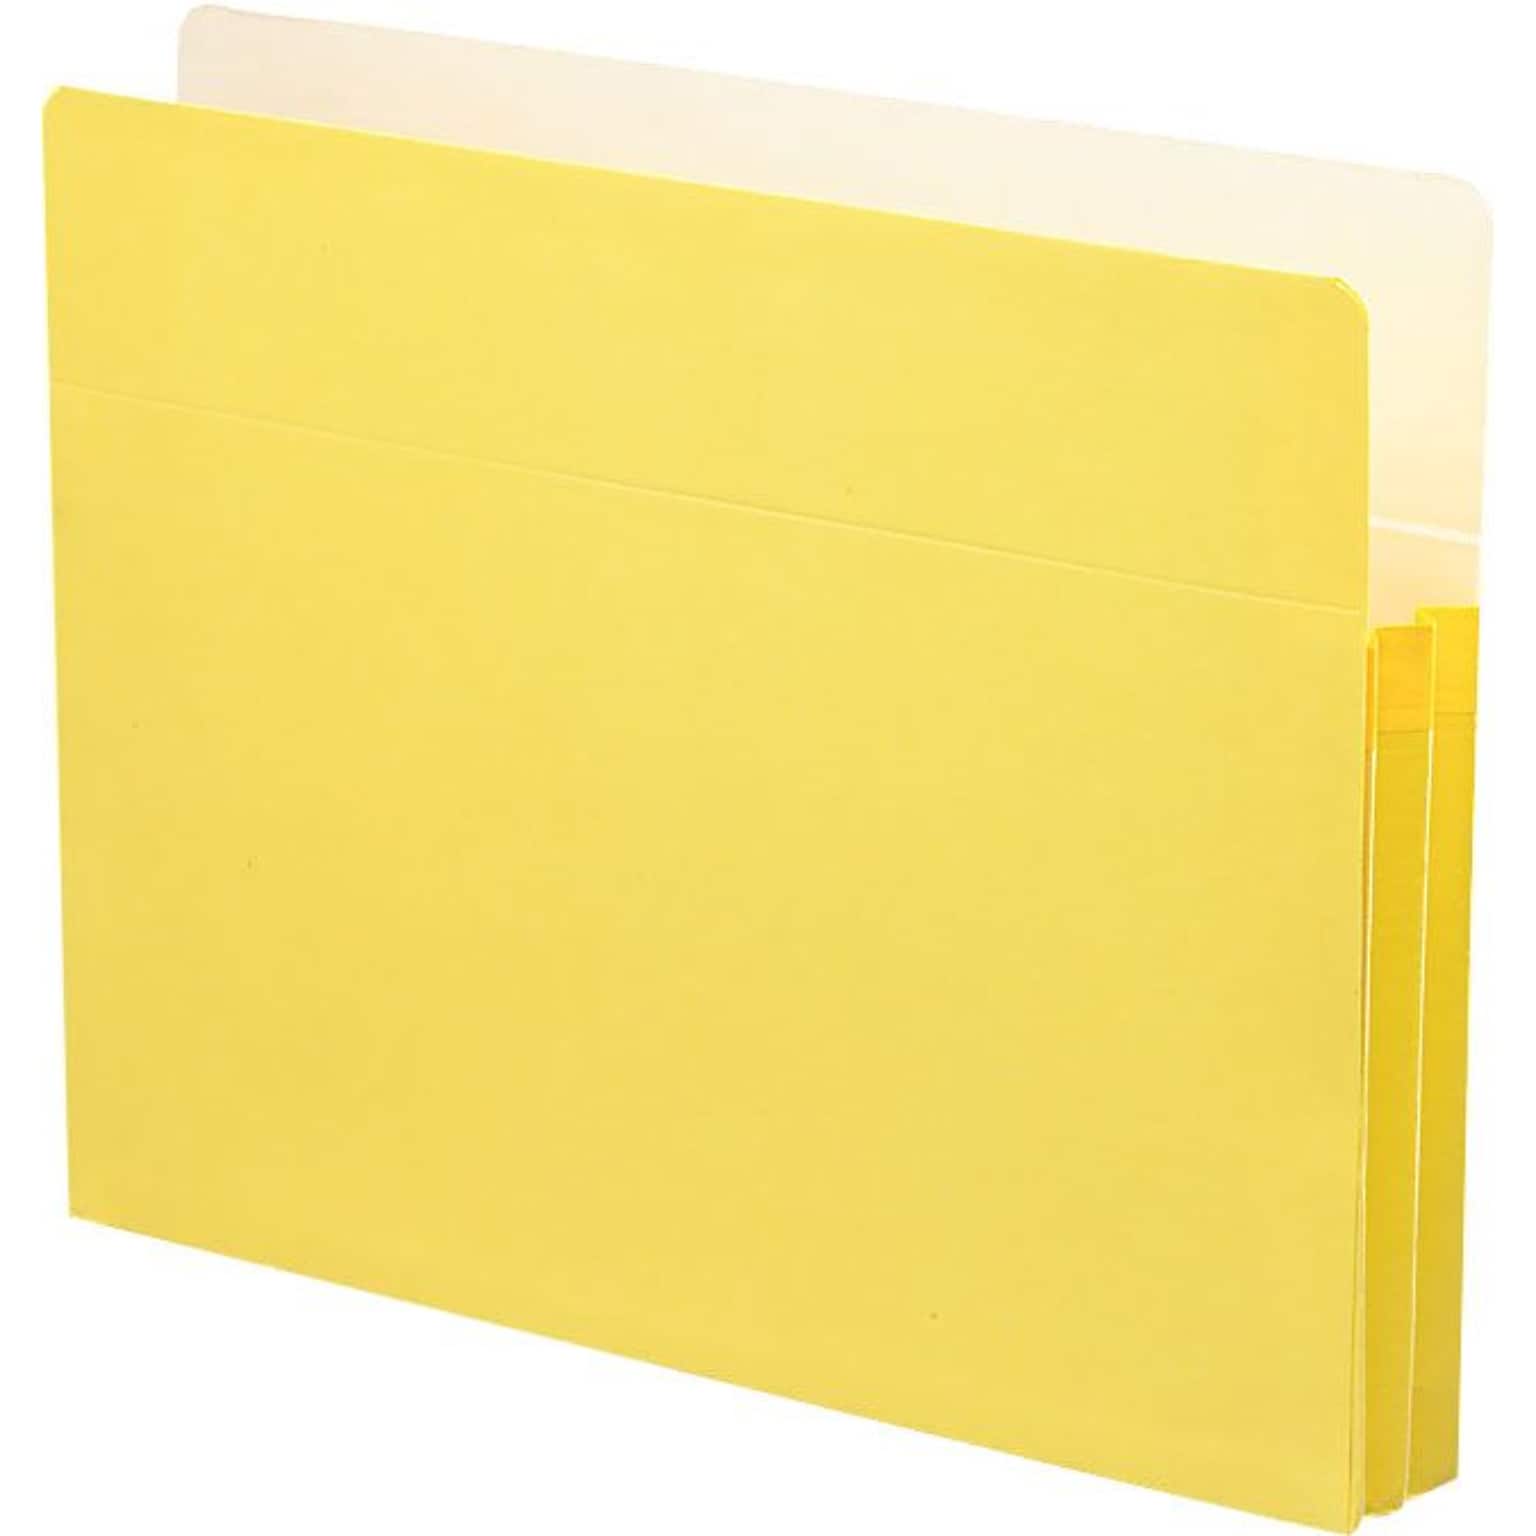 Smead 10% Recycled Reinforced File Pocket, 1 3/4 Expansion, Letter Size, Yellow (SMD73223UNI)